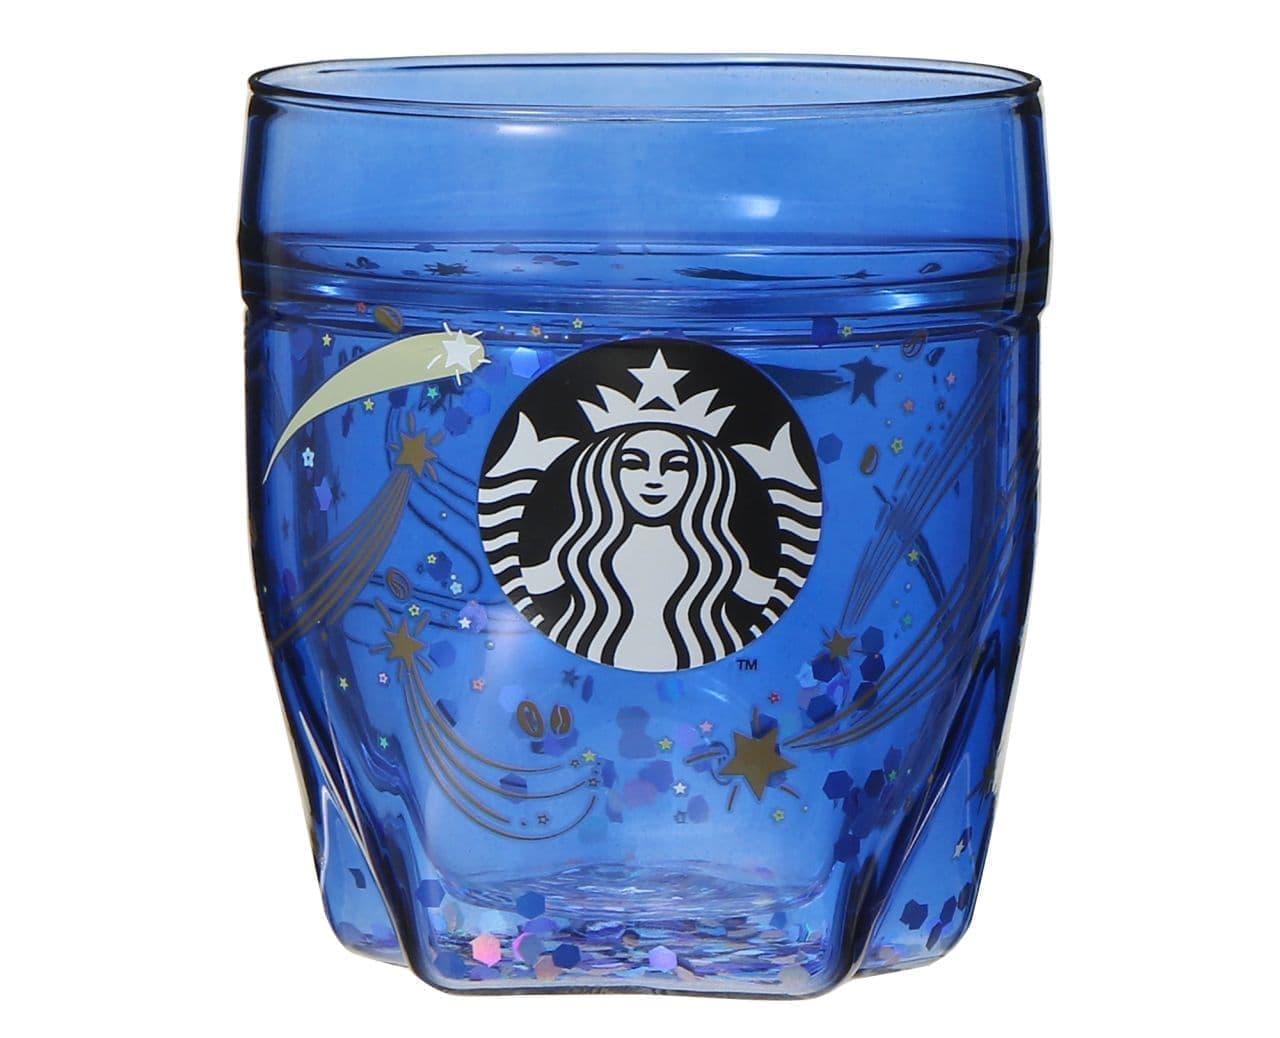 Starbucks "Heat Resistant Double Wall Glass Cup Shooting Star 237ml